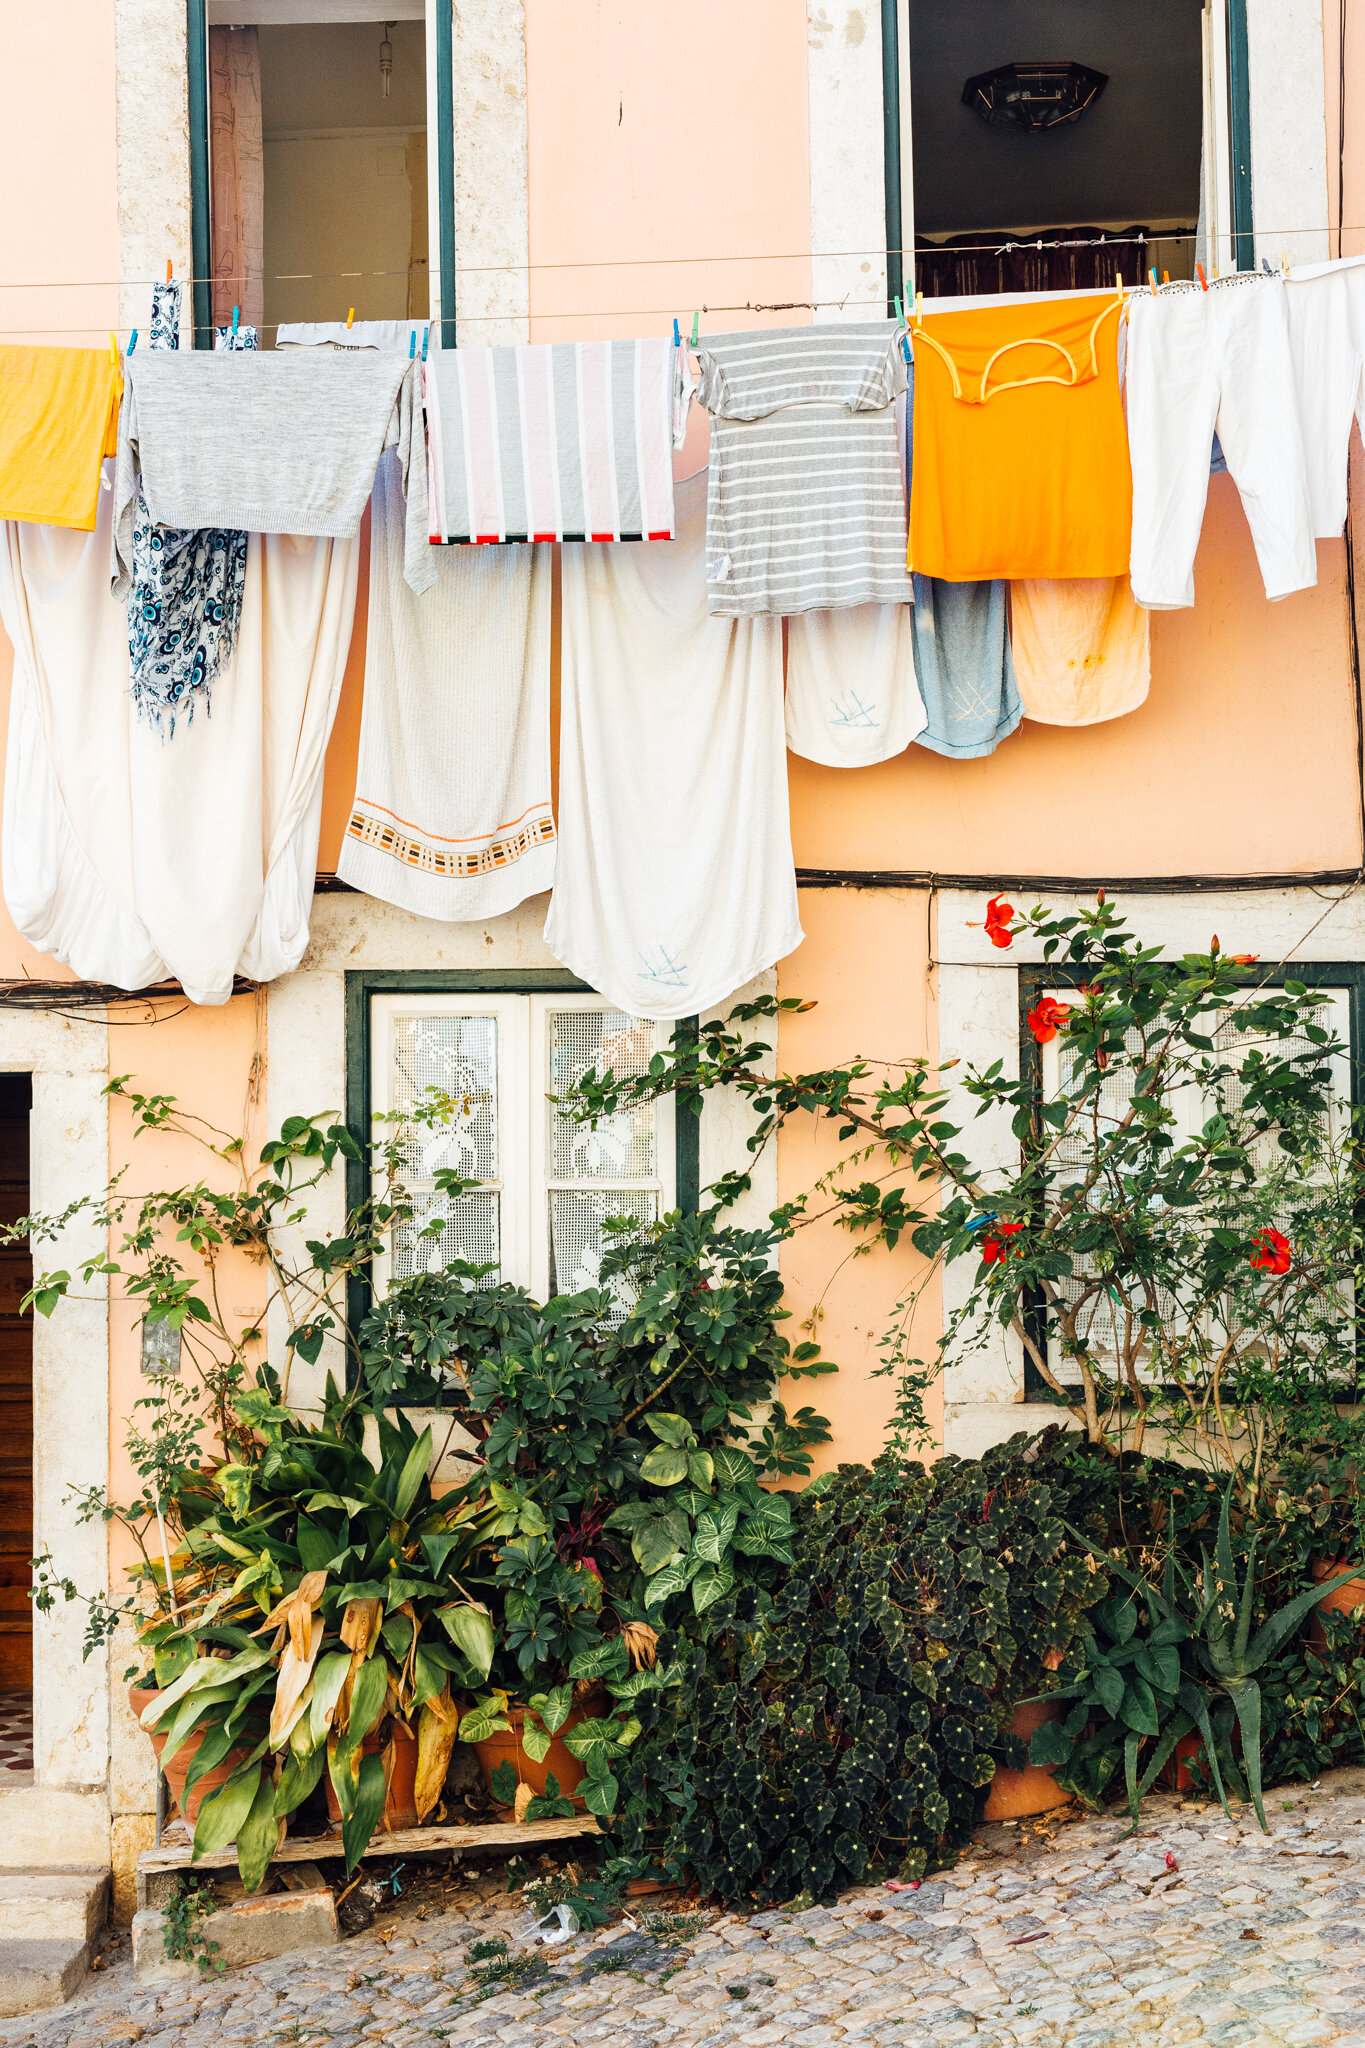 Authentic Lisbon Living: Laundry Hanging in the Breeze - Photography ...